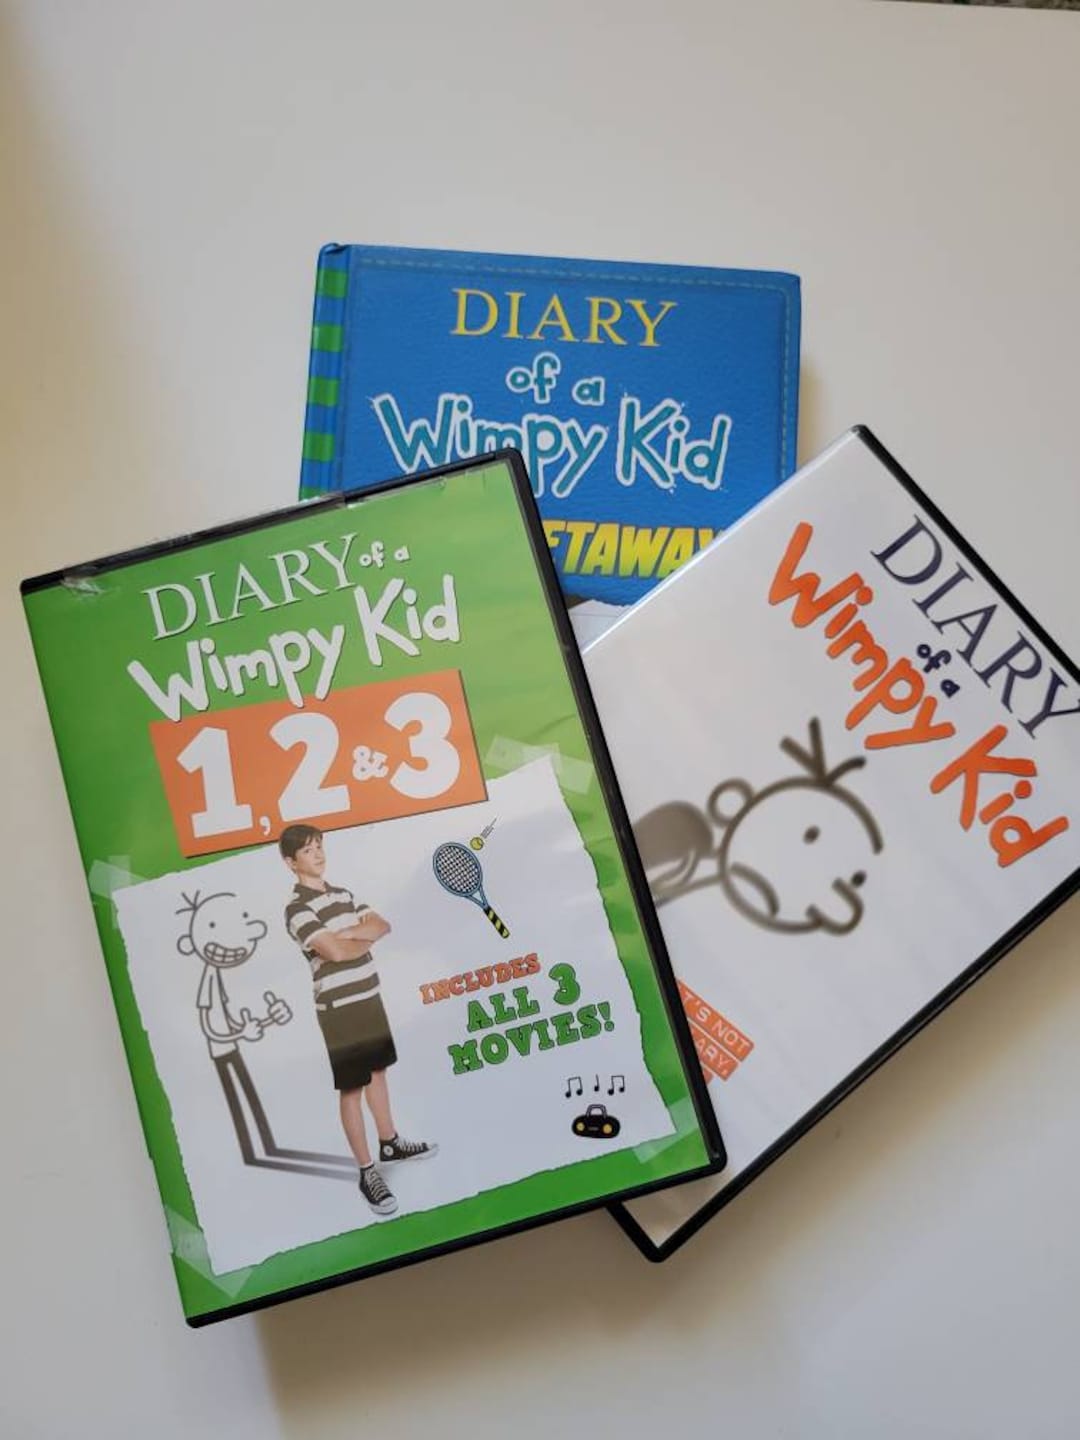 Plus　New　Etsy　Kiddvds　the　A　Hardcover　Book　Zealand　WIMPY　of　DIARY　12